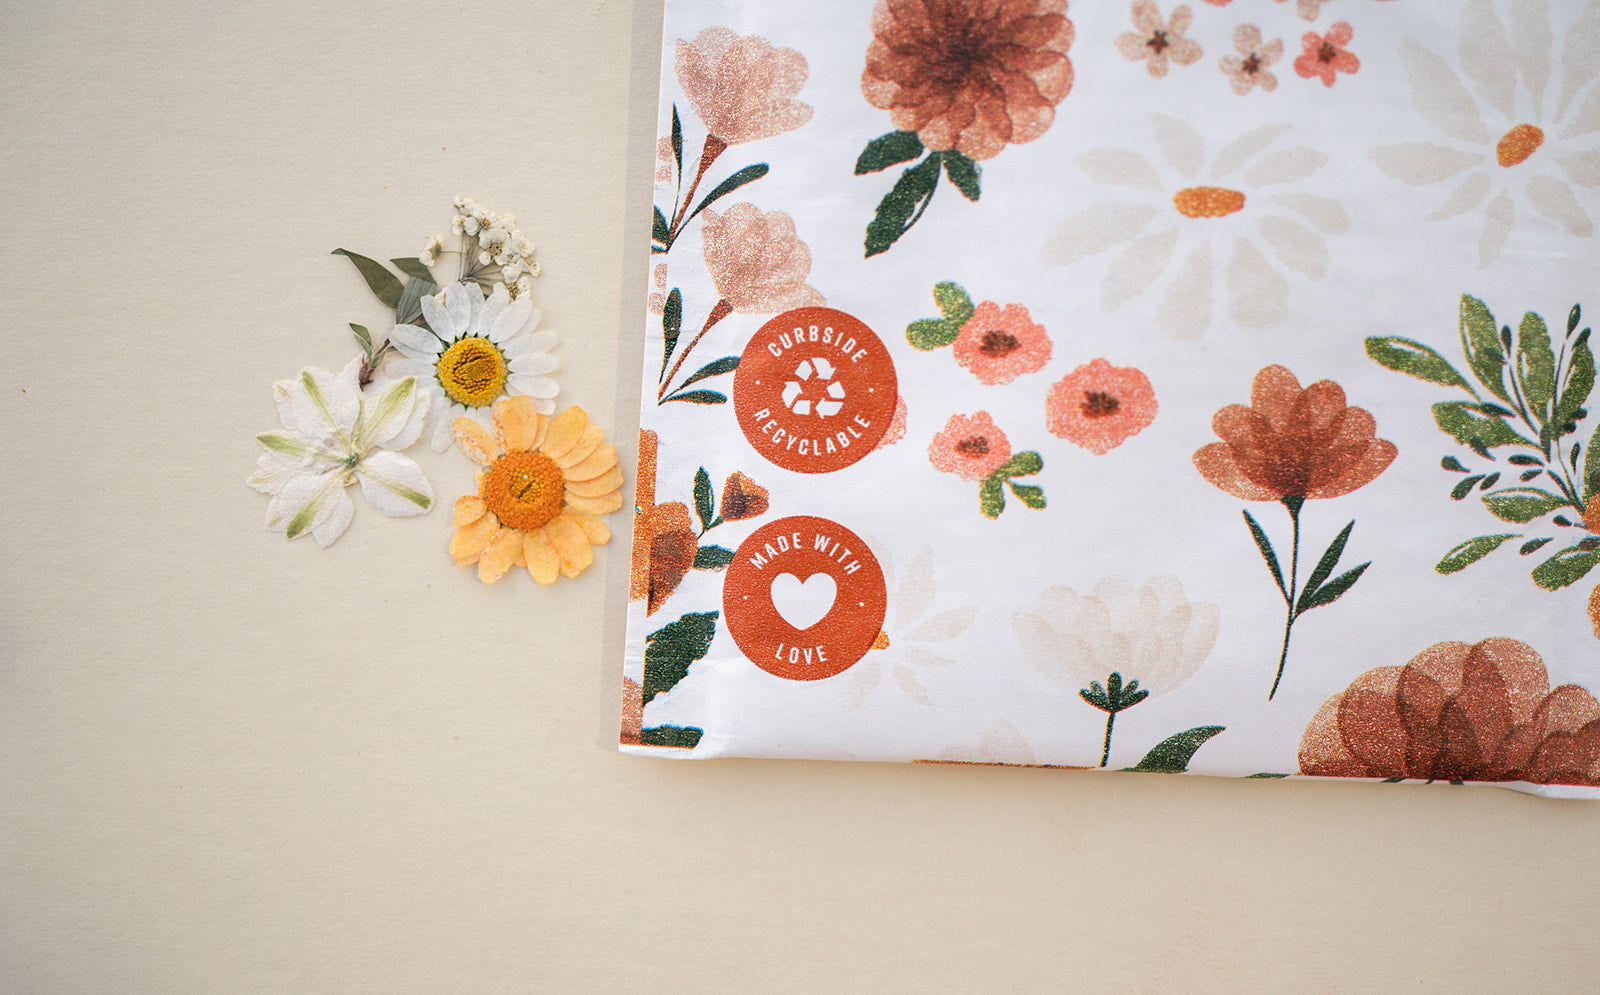 A Gardenlumina Padded Paper Mailers 10" x 13" bag with flowers and an impack.co sticker on it.